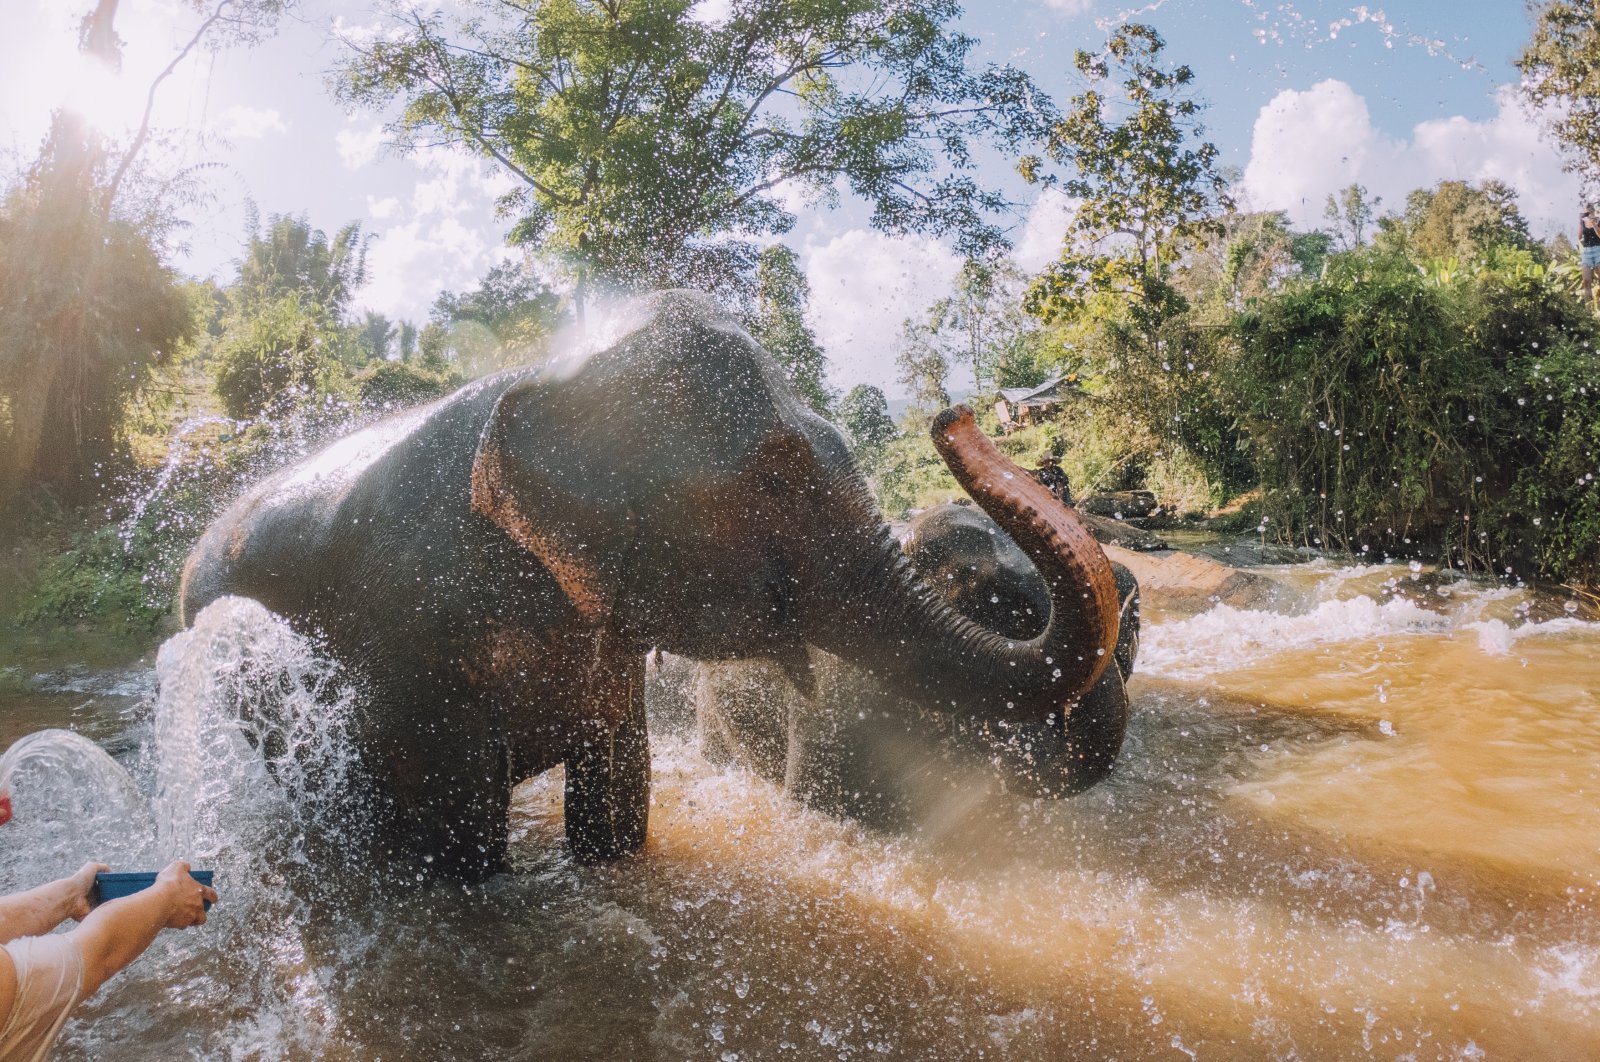 Elephants bathe in mud in the Chang Mai region of Thailand. (Photo by Gettyimages)